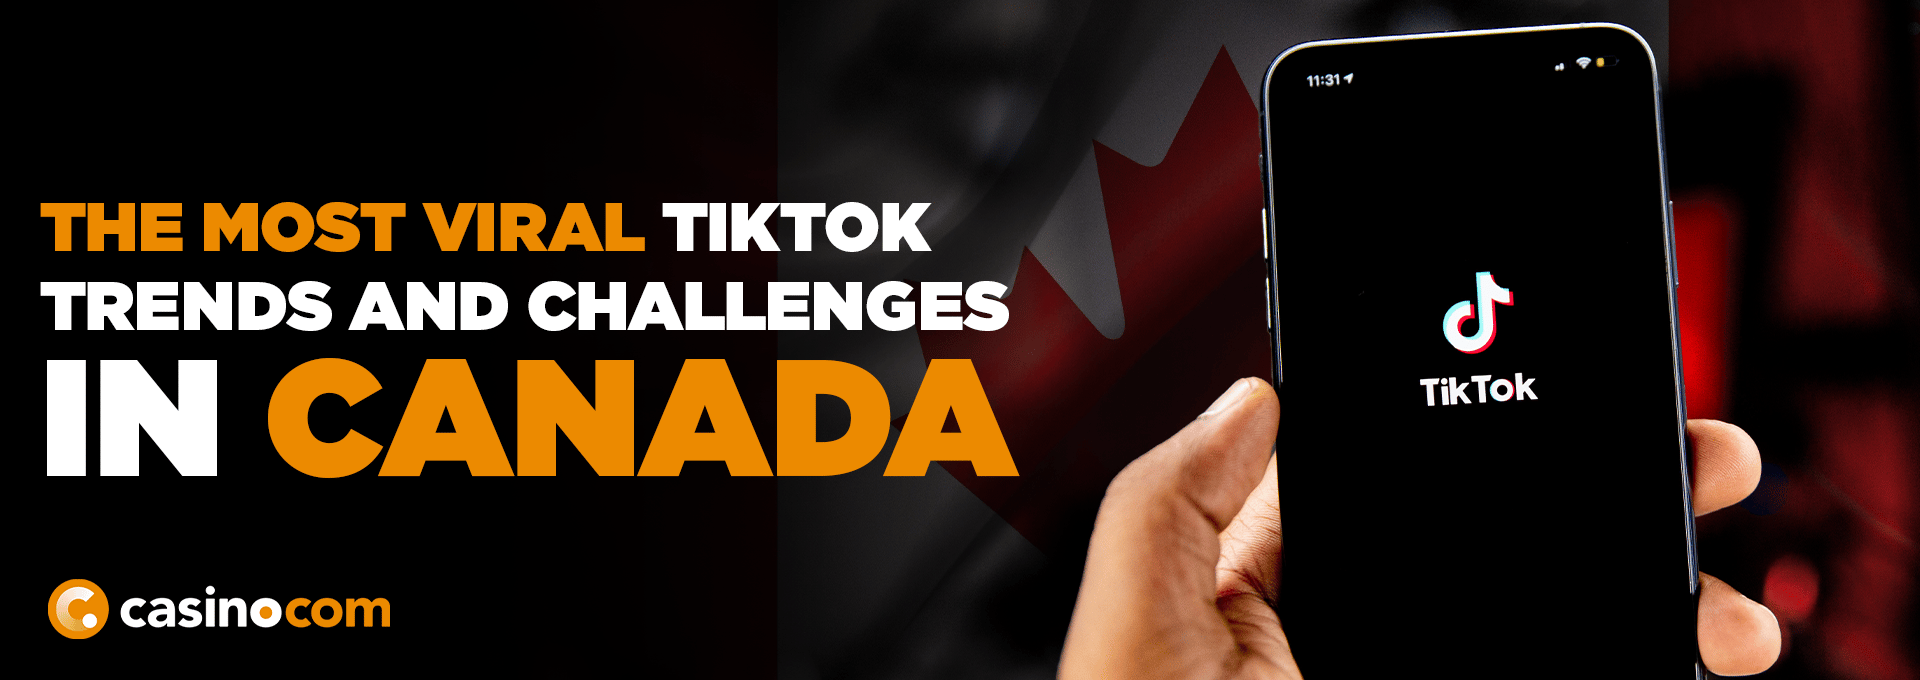 The Most Viral TikTok Trends in Canada